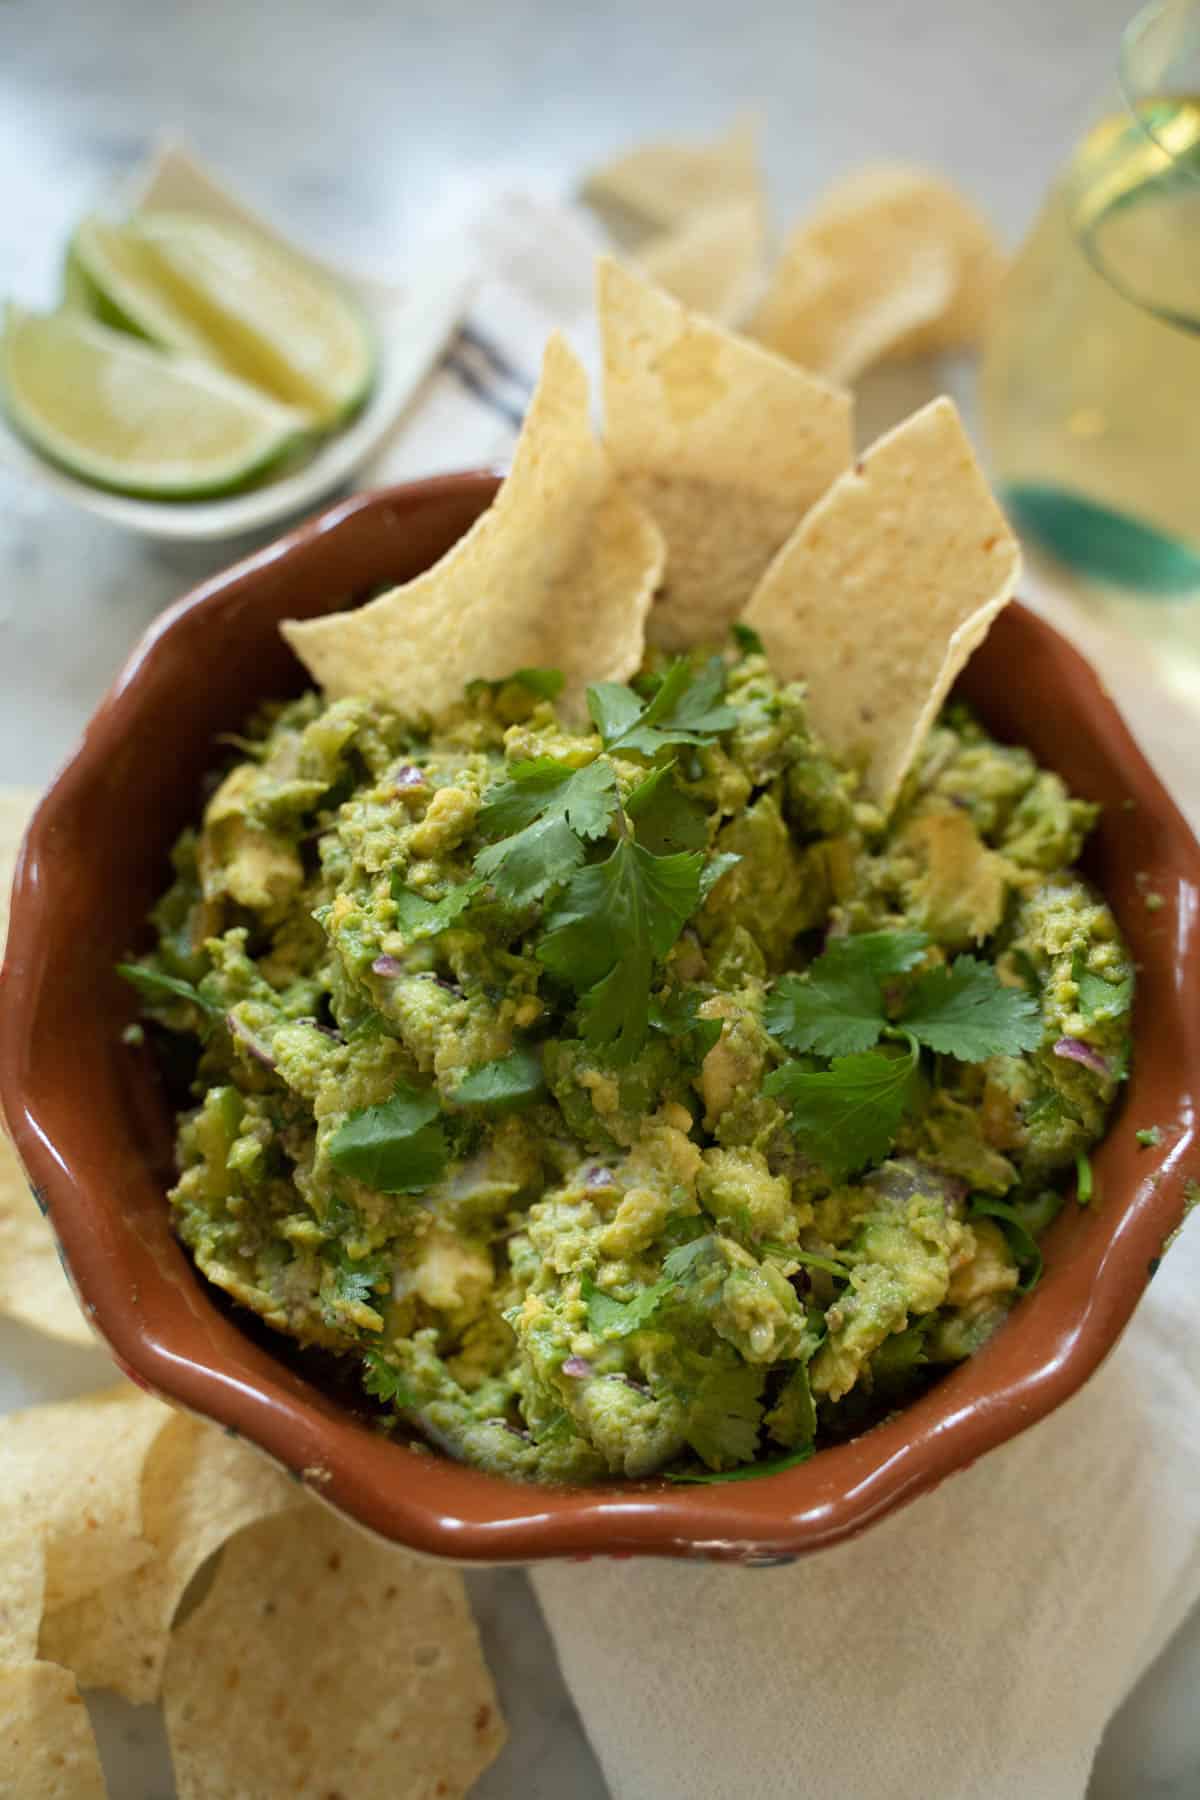 guacamole in a brown bowl surrounded by tortilla chips and a glass of white wine